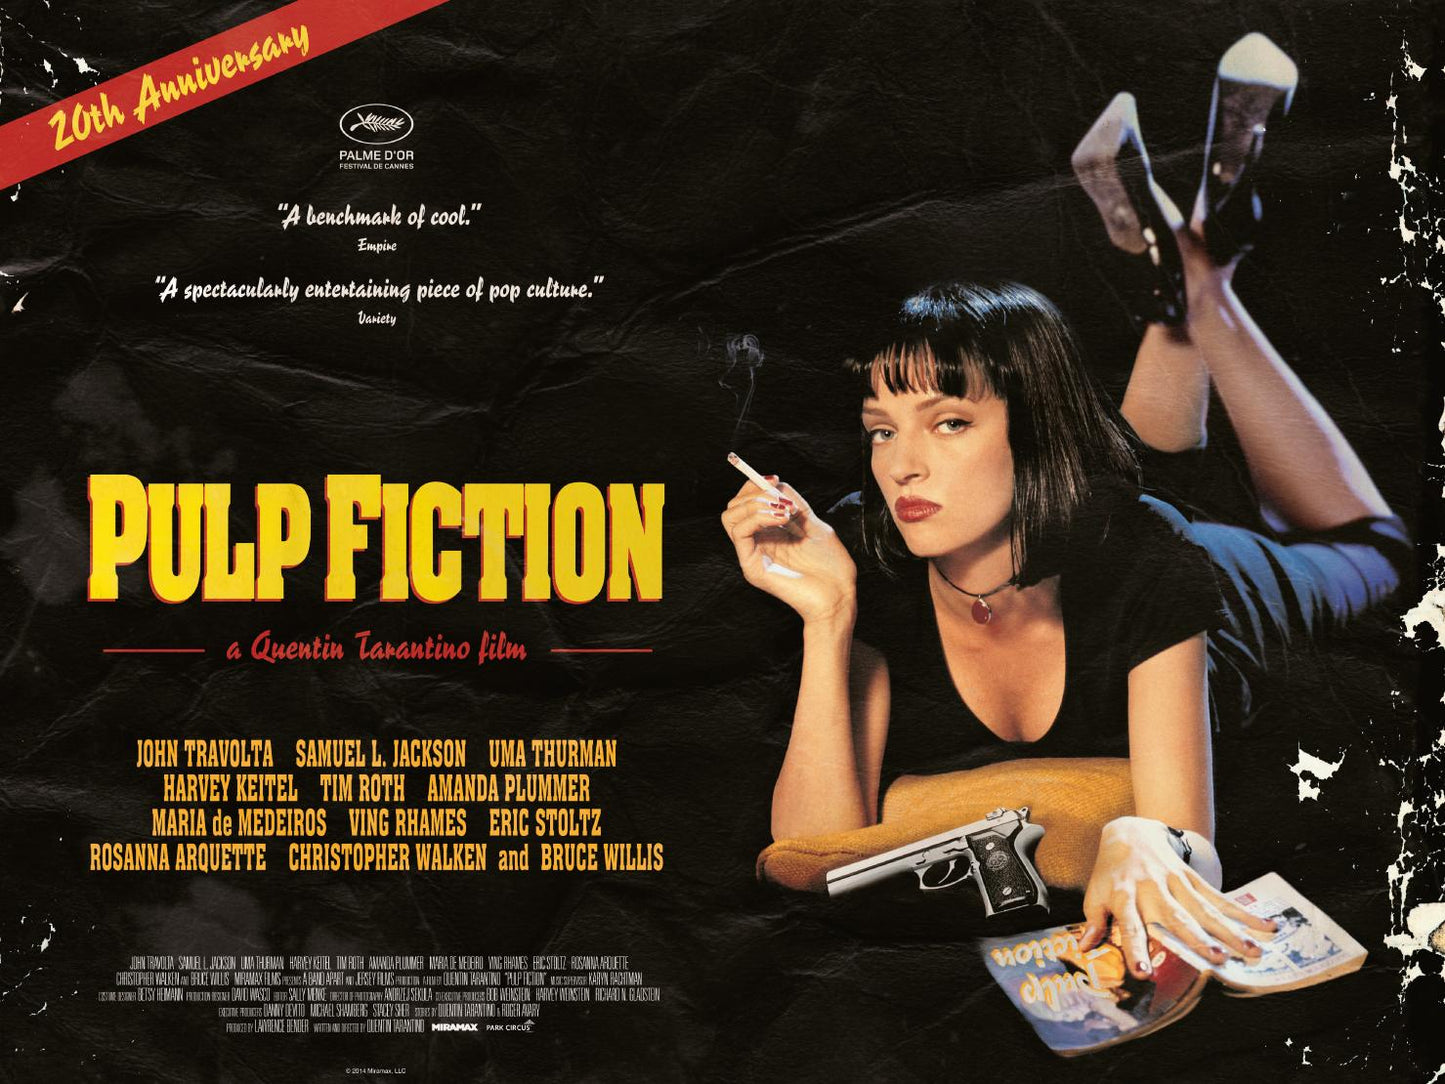 Pulp Fiction (Special Wide Screen Edition) - John Travolta - Touchstone Home Video - Vintage - Pal VHS-